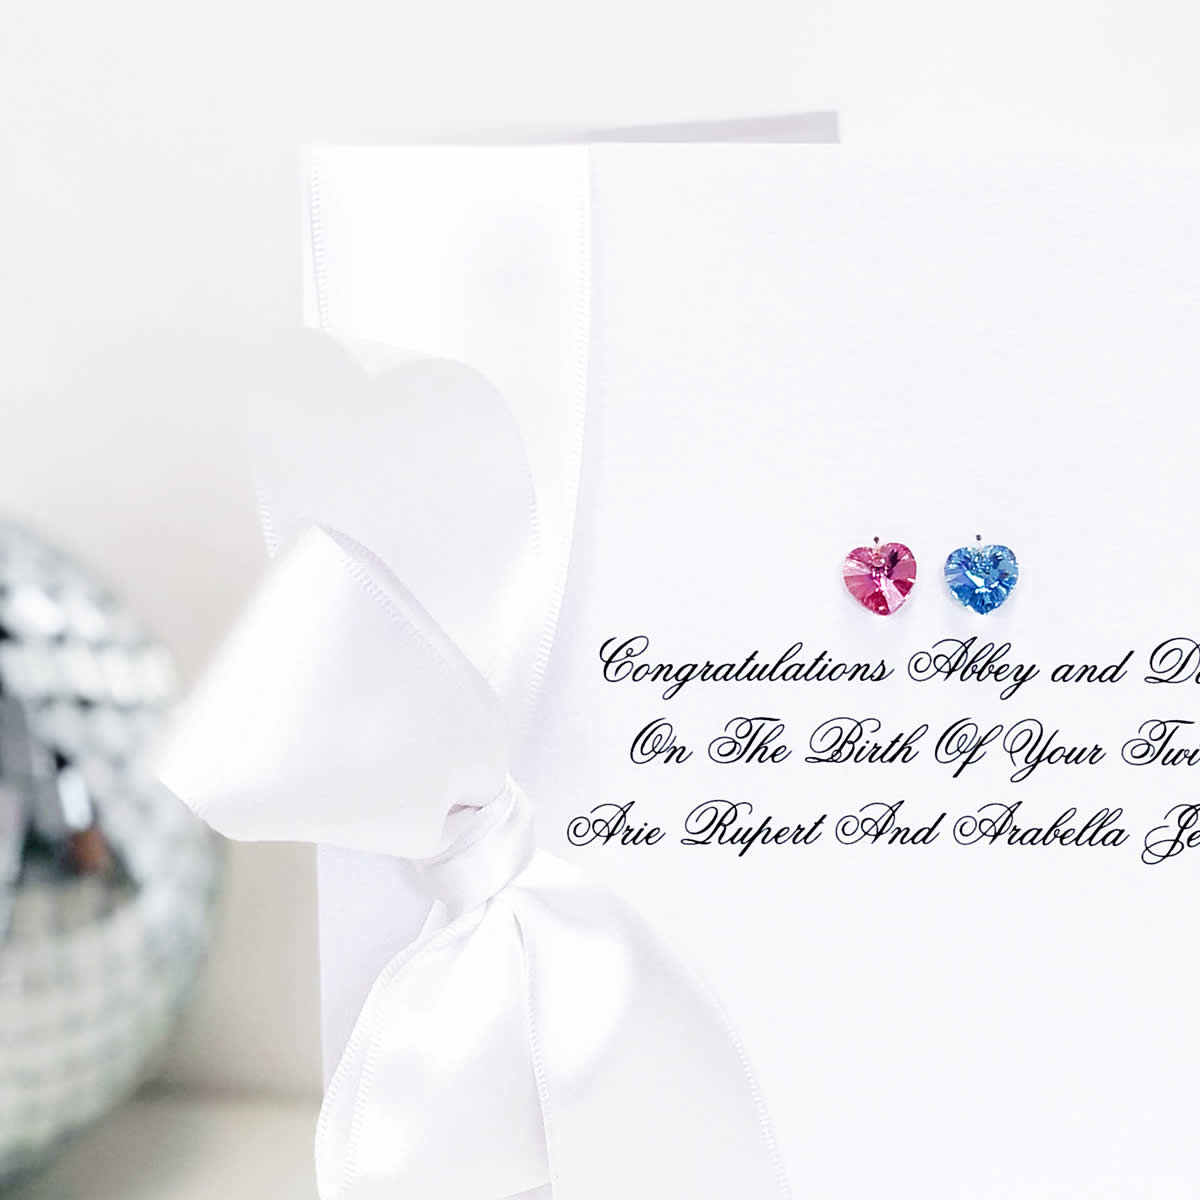 What to give as baby twins gift / card | Swarosvki crystal heart for each twin | The Luxe Co